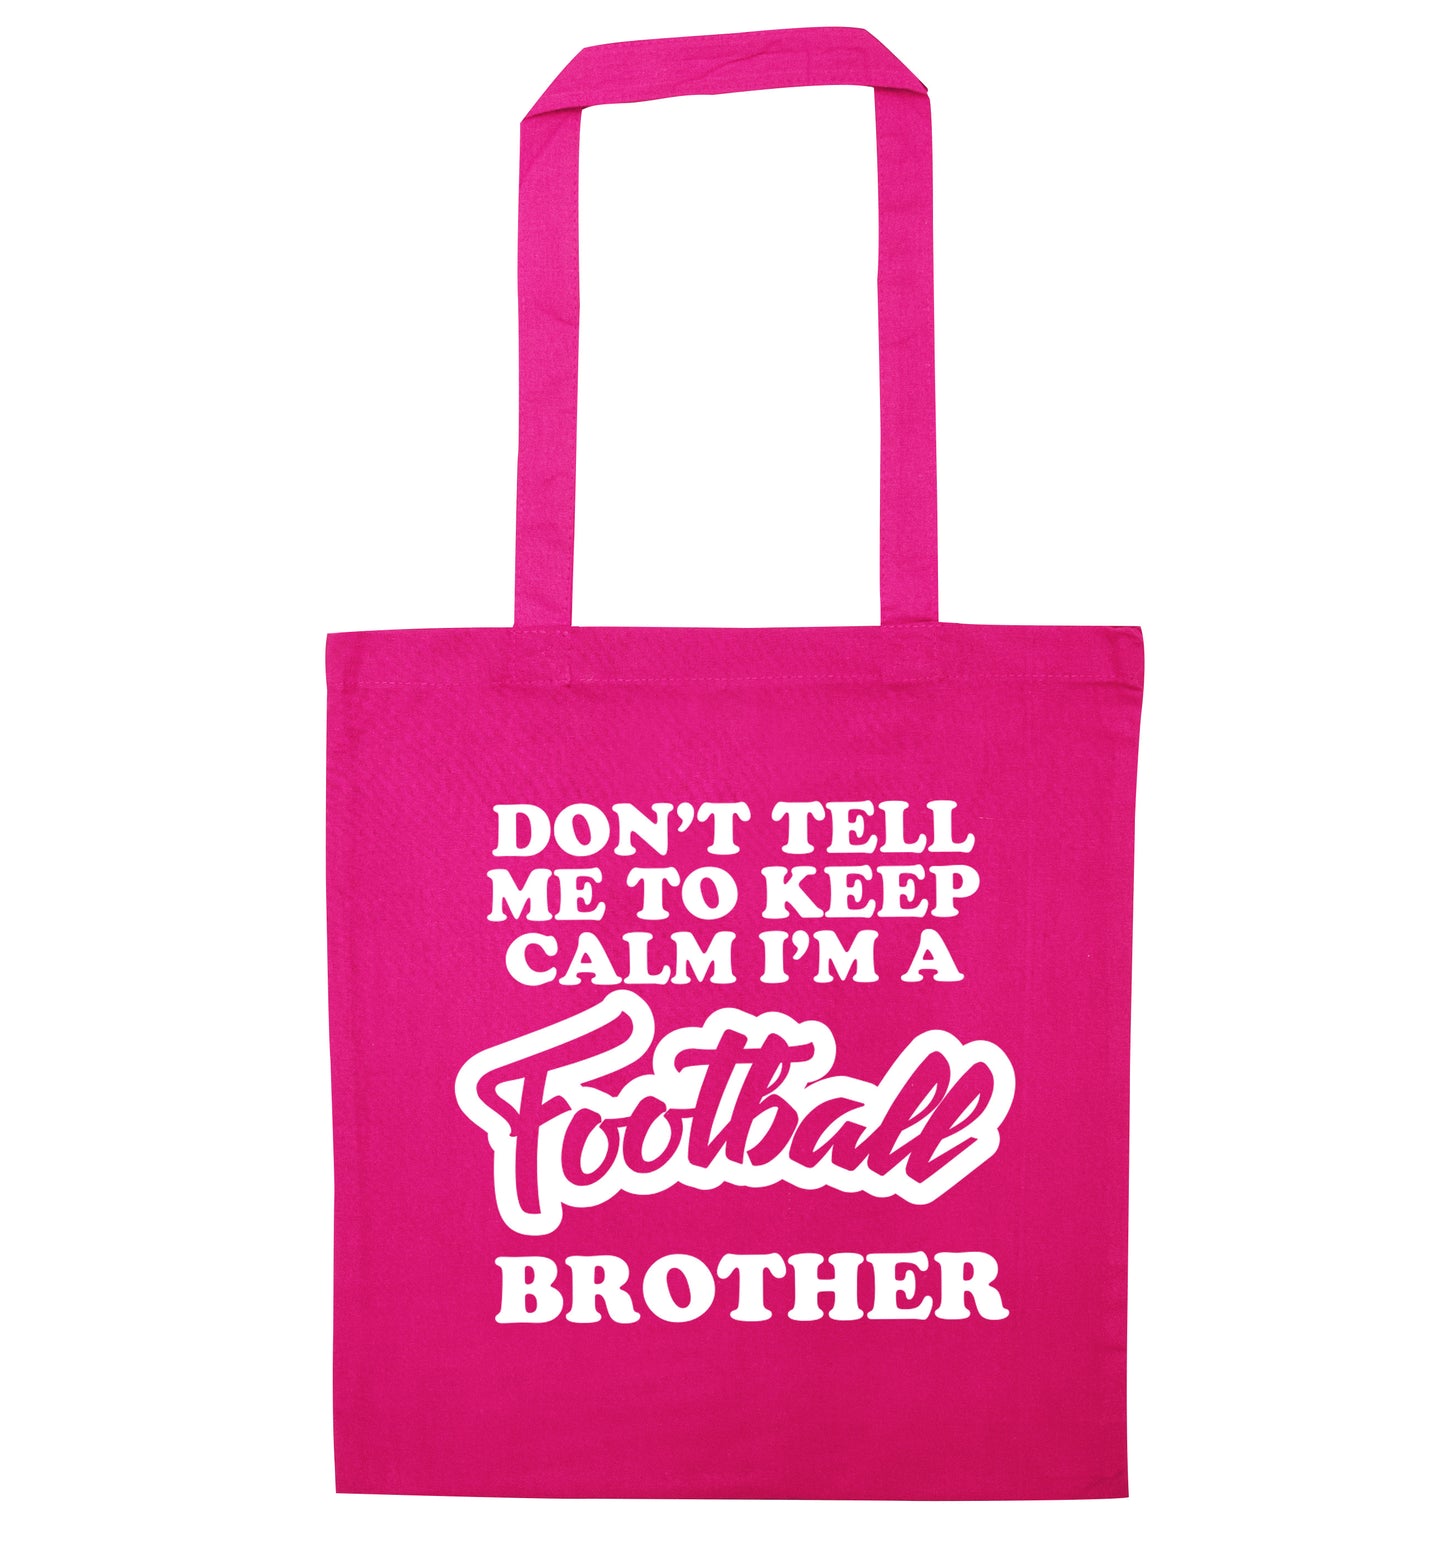 Don't tell me to keep calm I'm a football brother pink tote bag